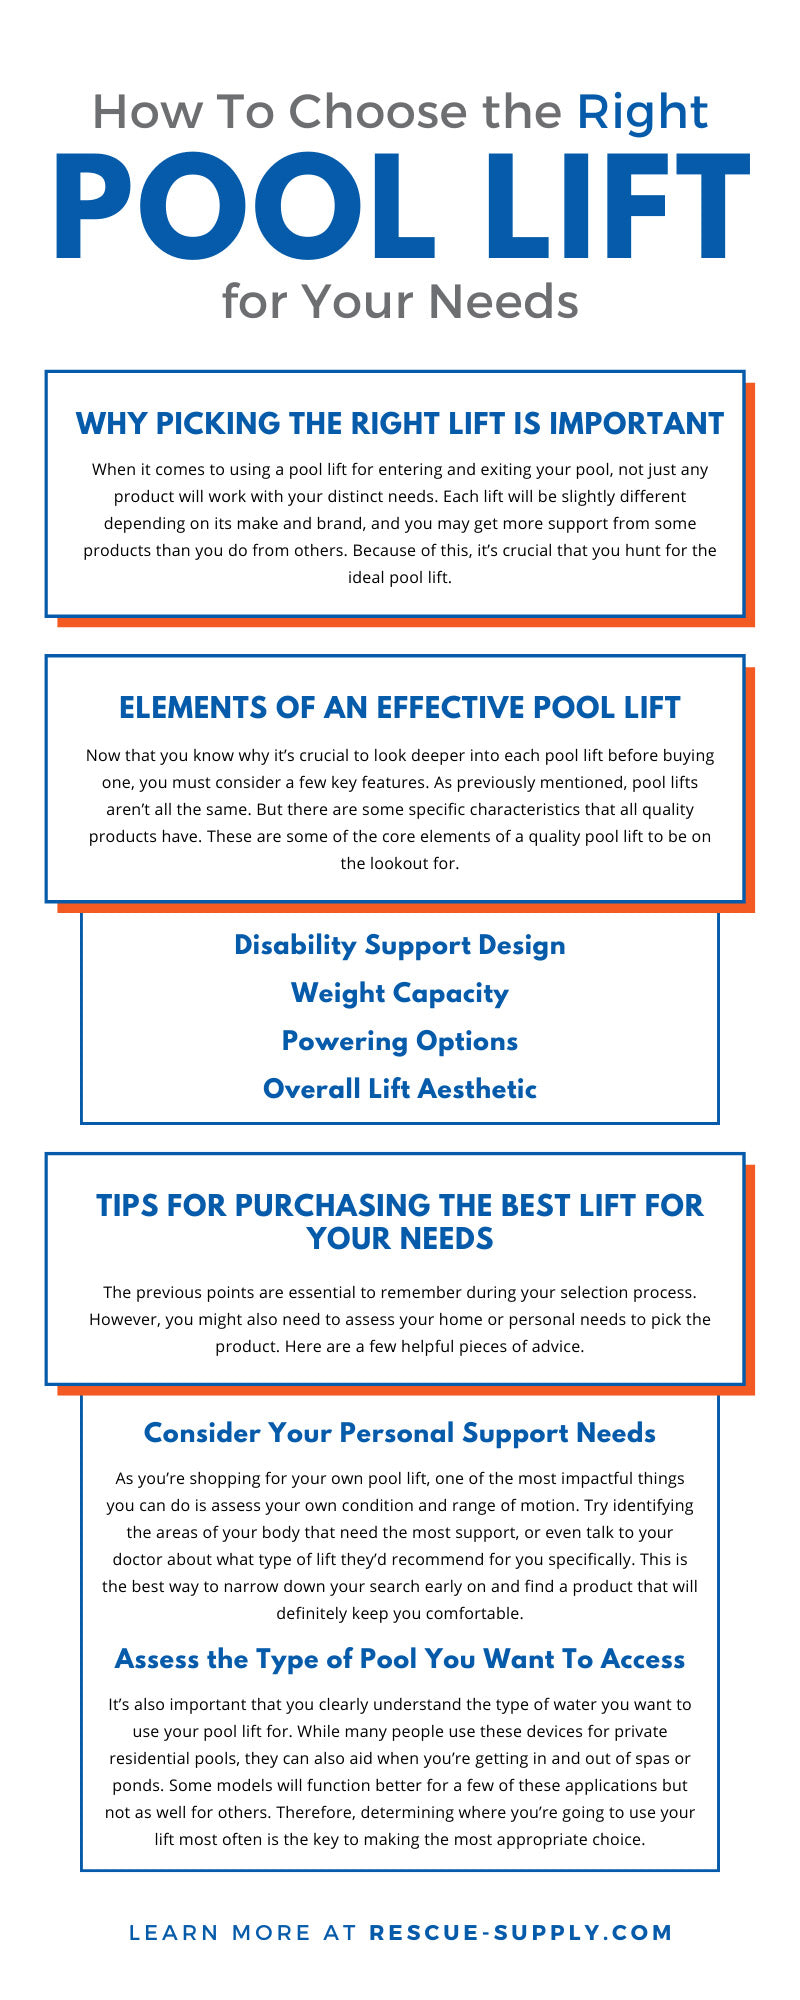 How To Choose the Right Pool Lift for Your Needs